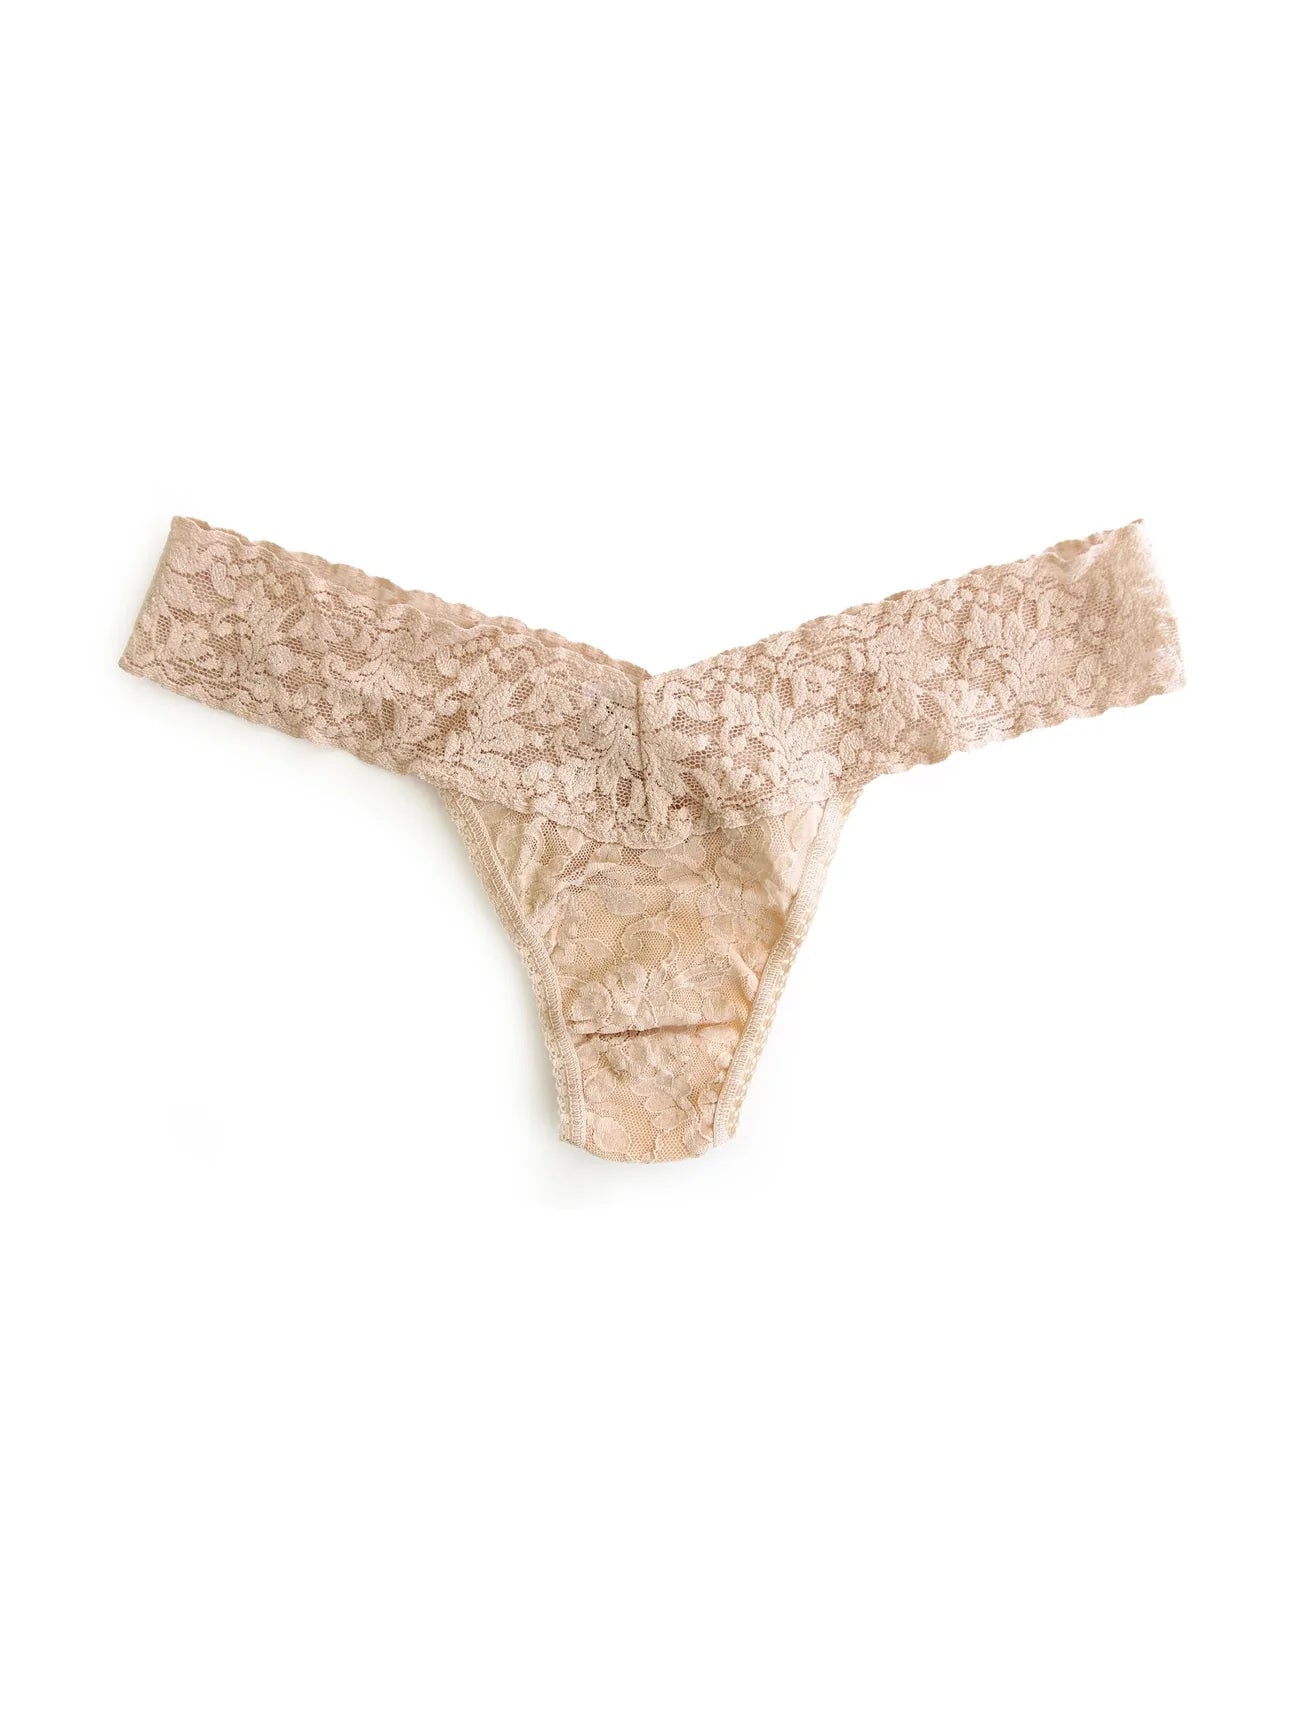 Low Rise Signature Lace Thong - Hanky Panky